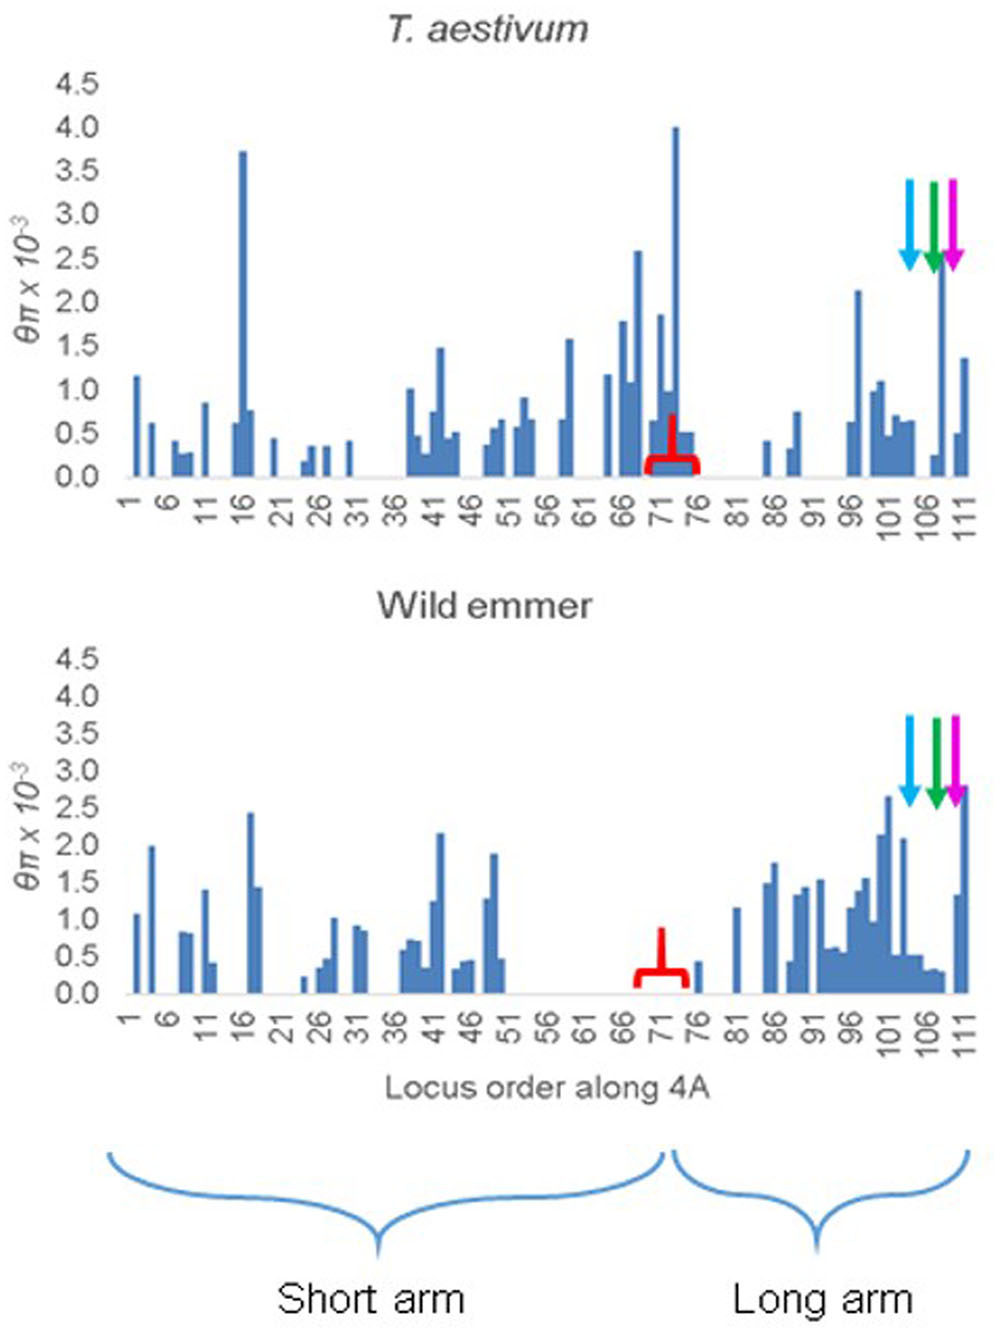 Frontiers | A High-Density Genetic Map of Wild Emmer Wheat from 